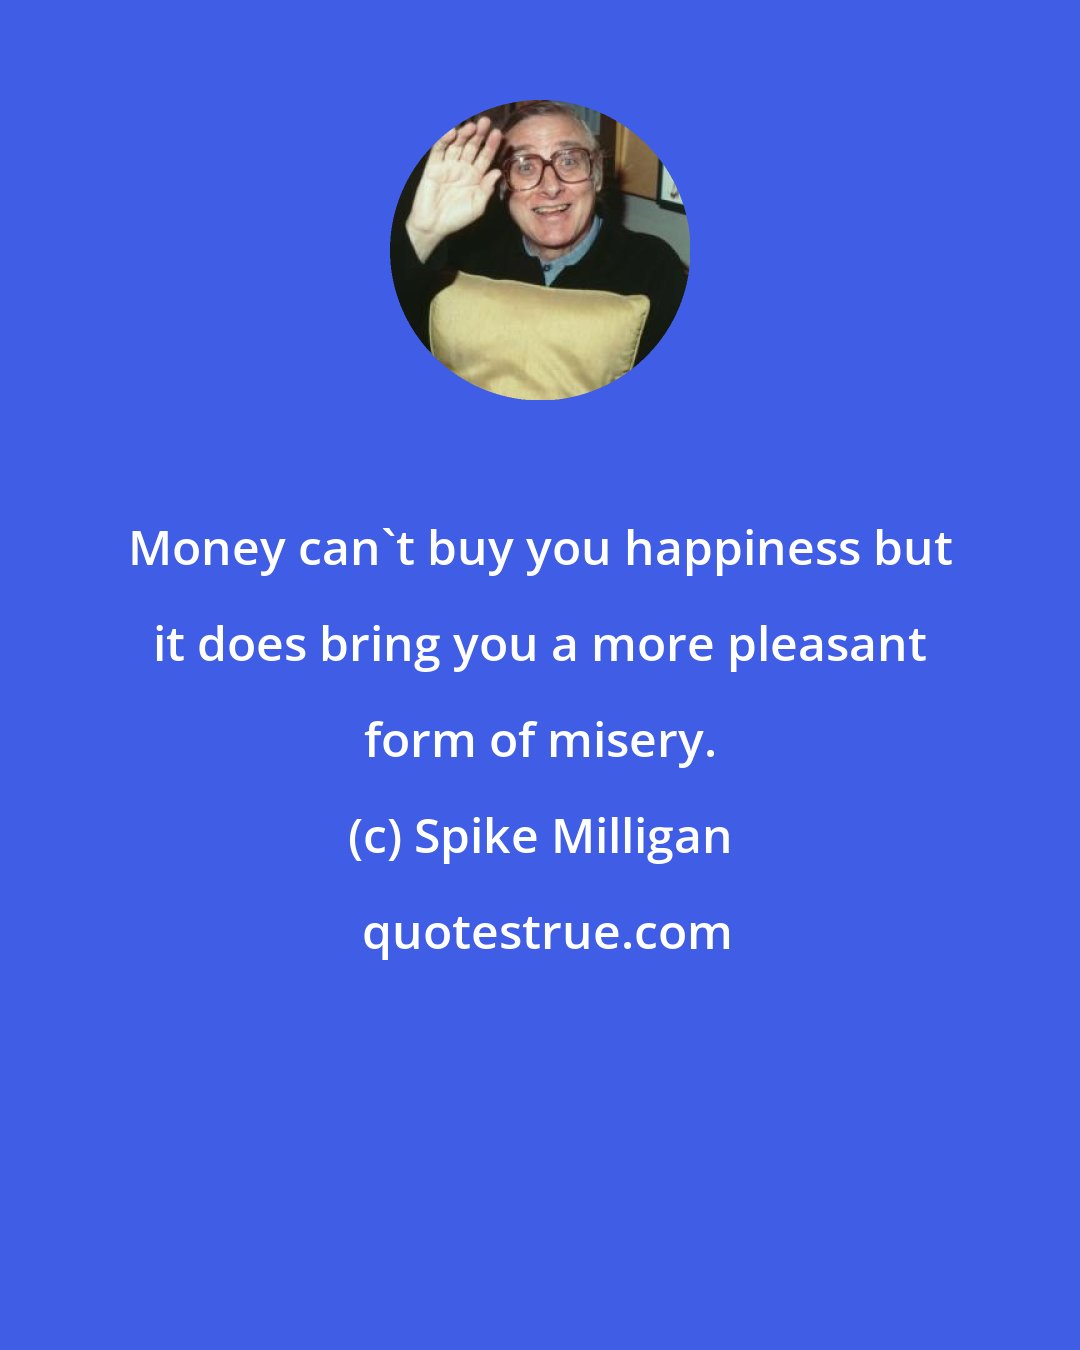 Spike Milligan: Money can't buy you happiness but it does bring you a more pleasant form of misery.